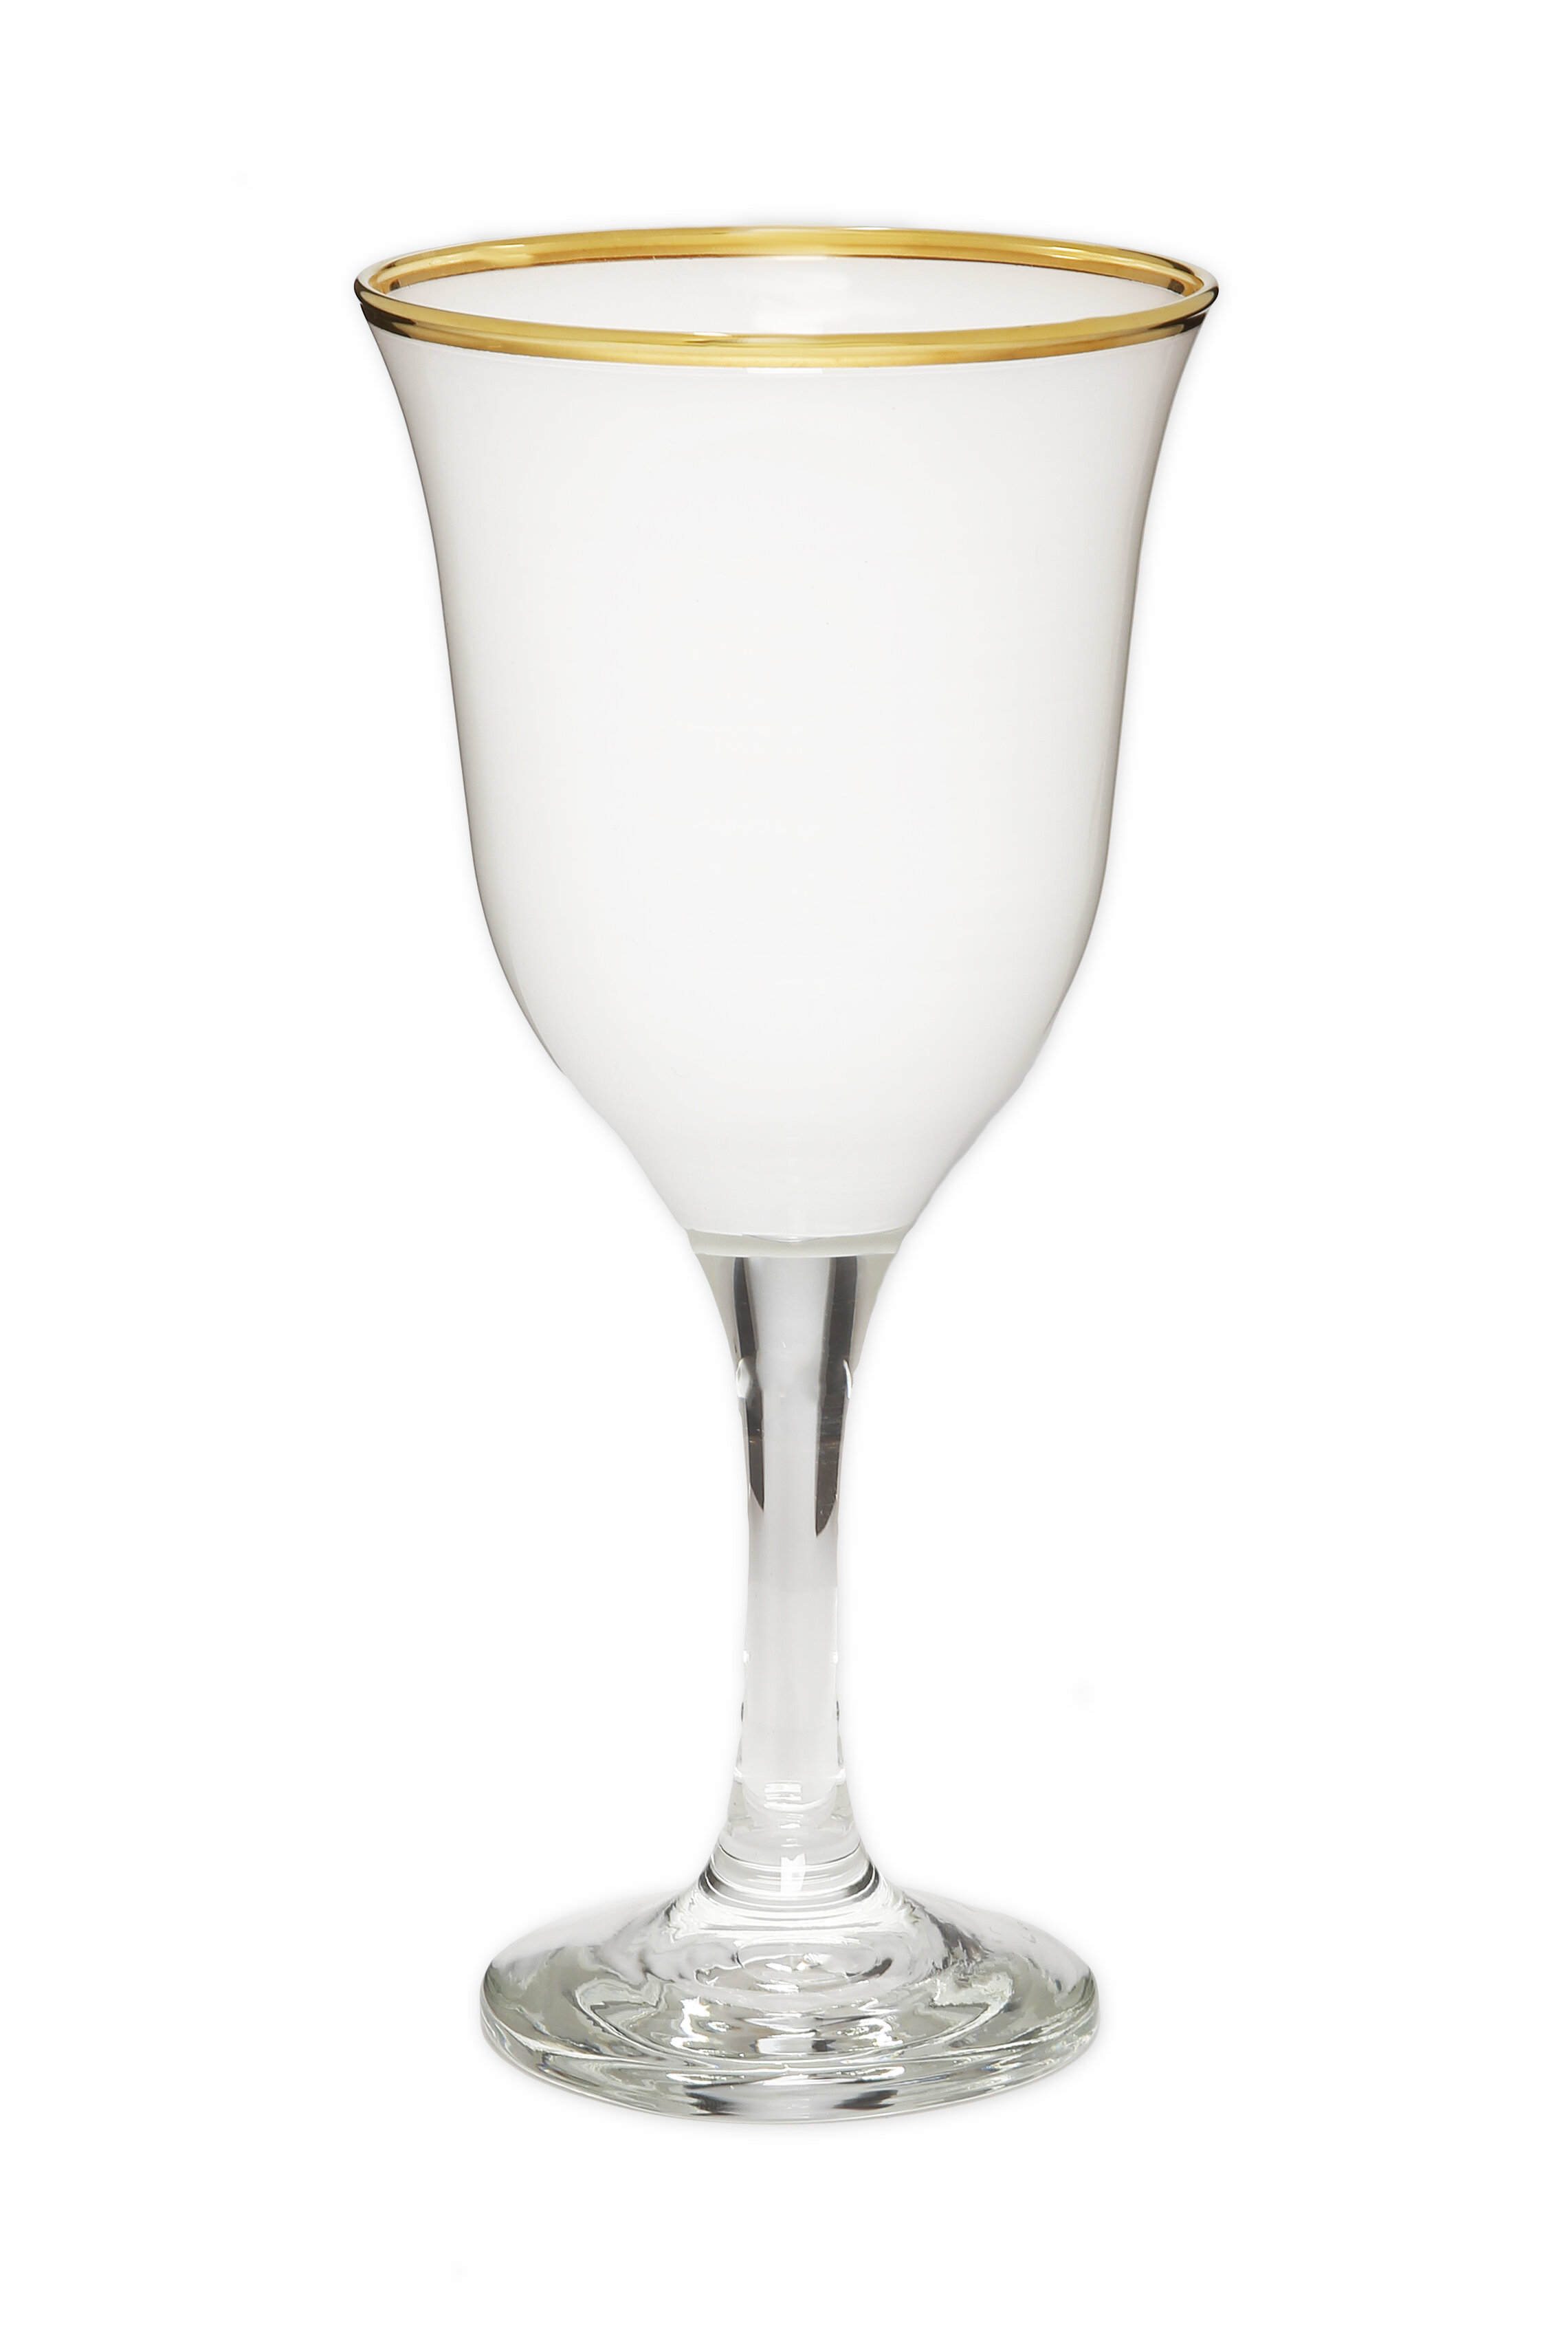 Classic Touch Set of 2 V-Shaped Wine Glasses with Clear Stem, 14 oz., White